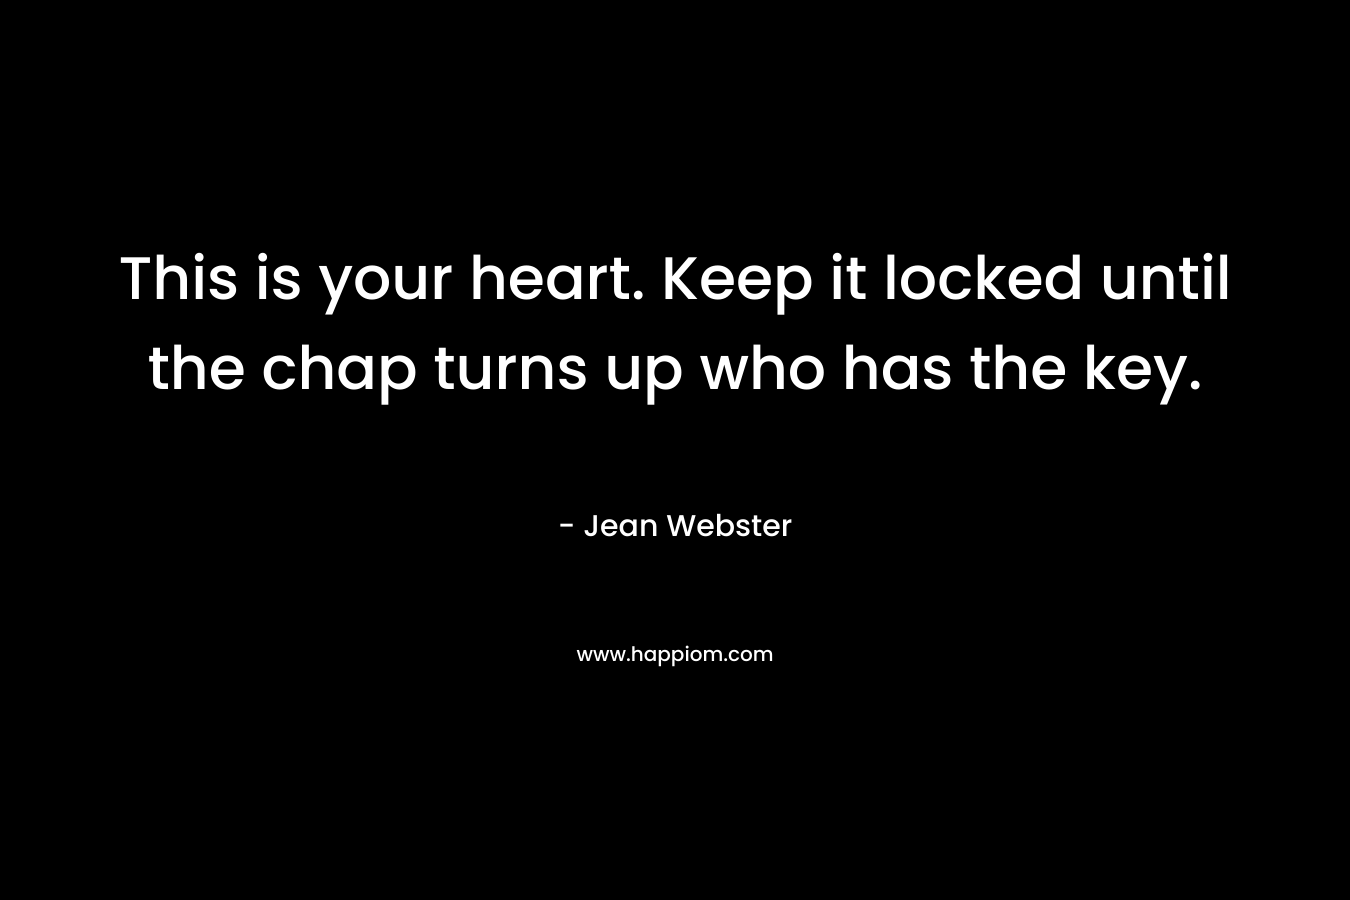 This is your heart. Keep it locked until the chap turns up who has the key. – Jean Webster